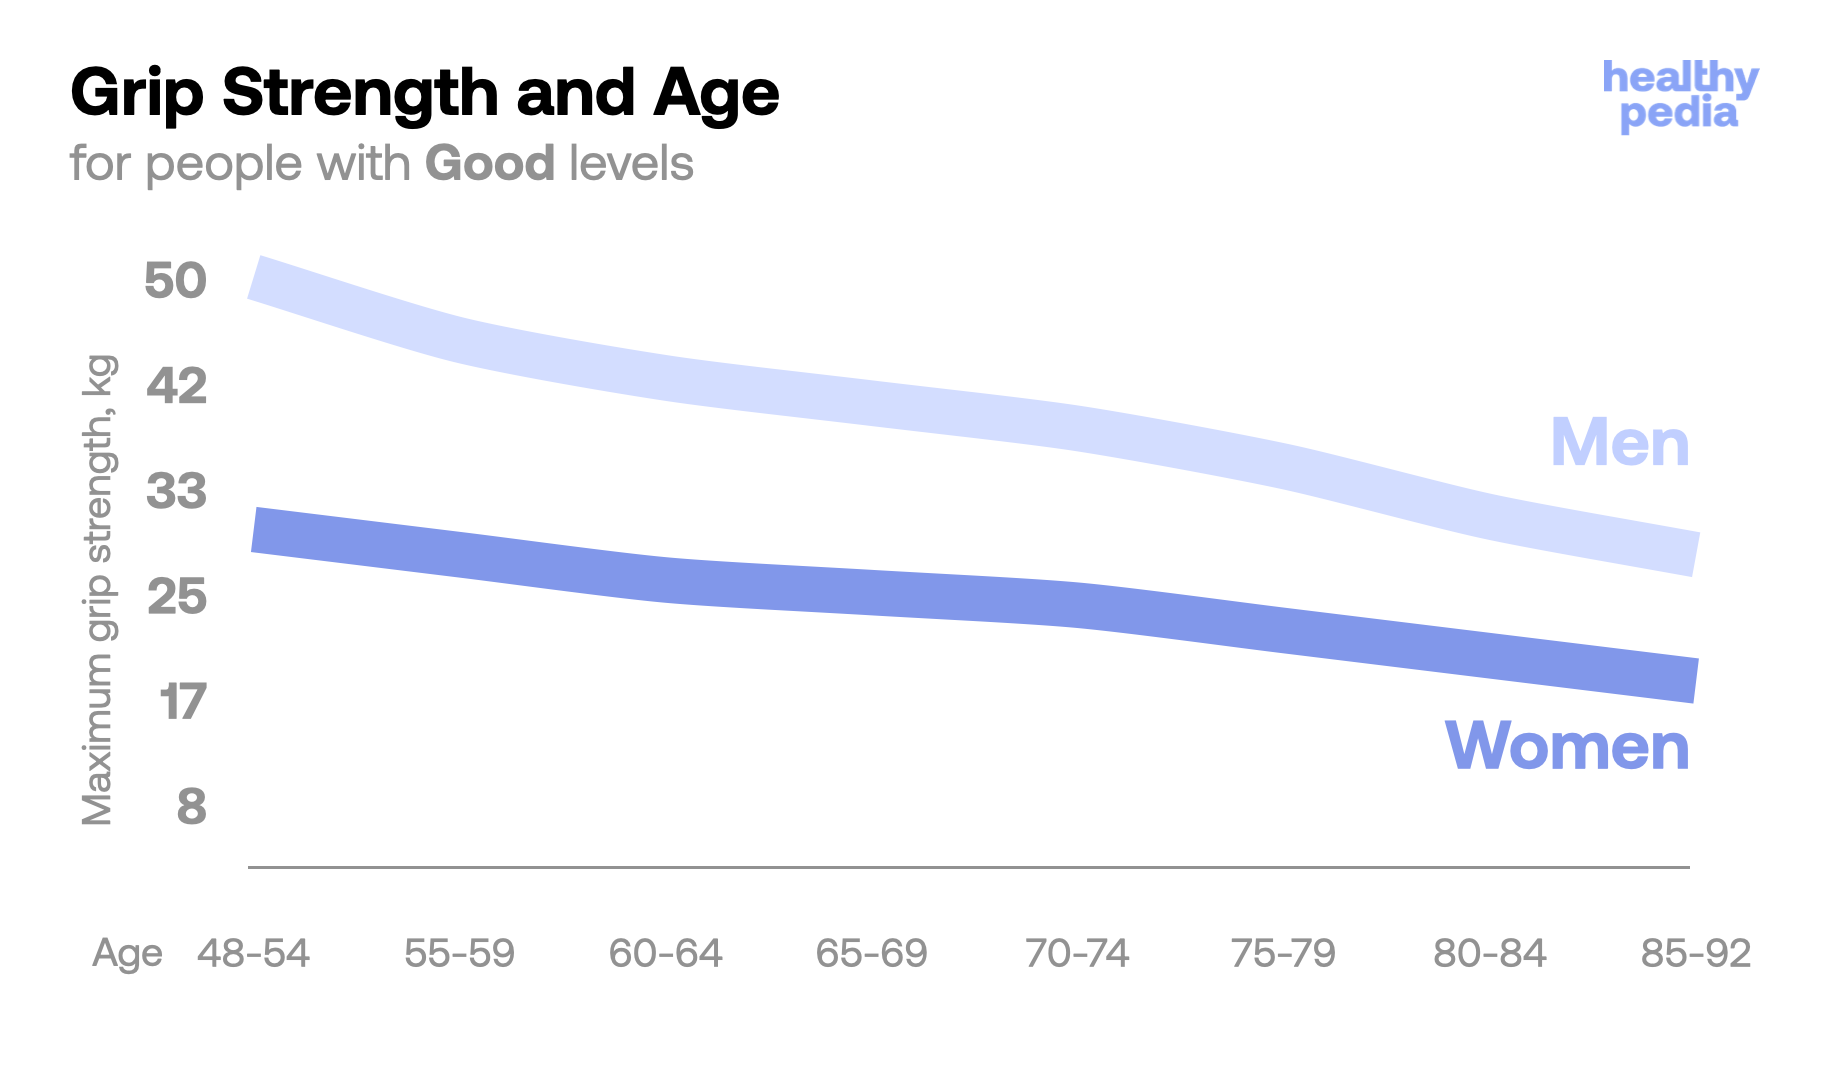 Grip Strength and Age. Statistics